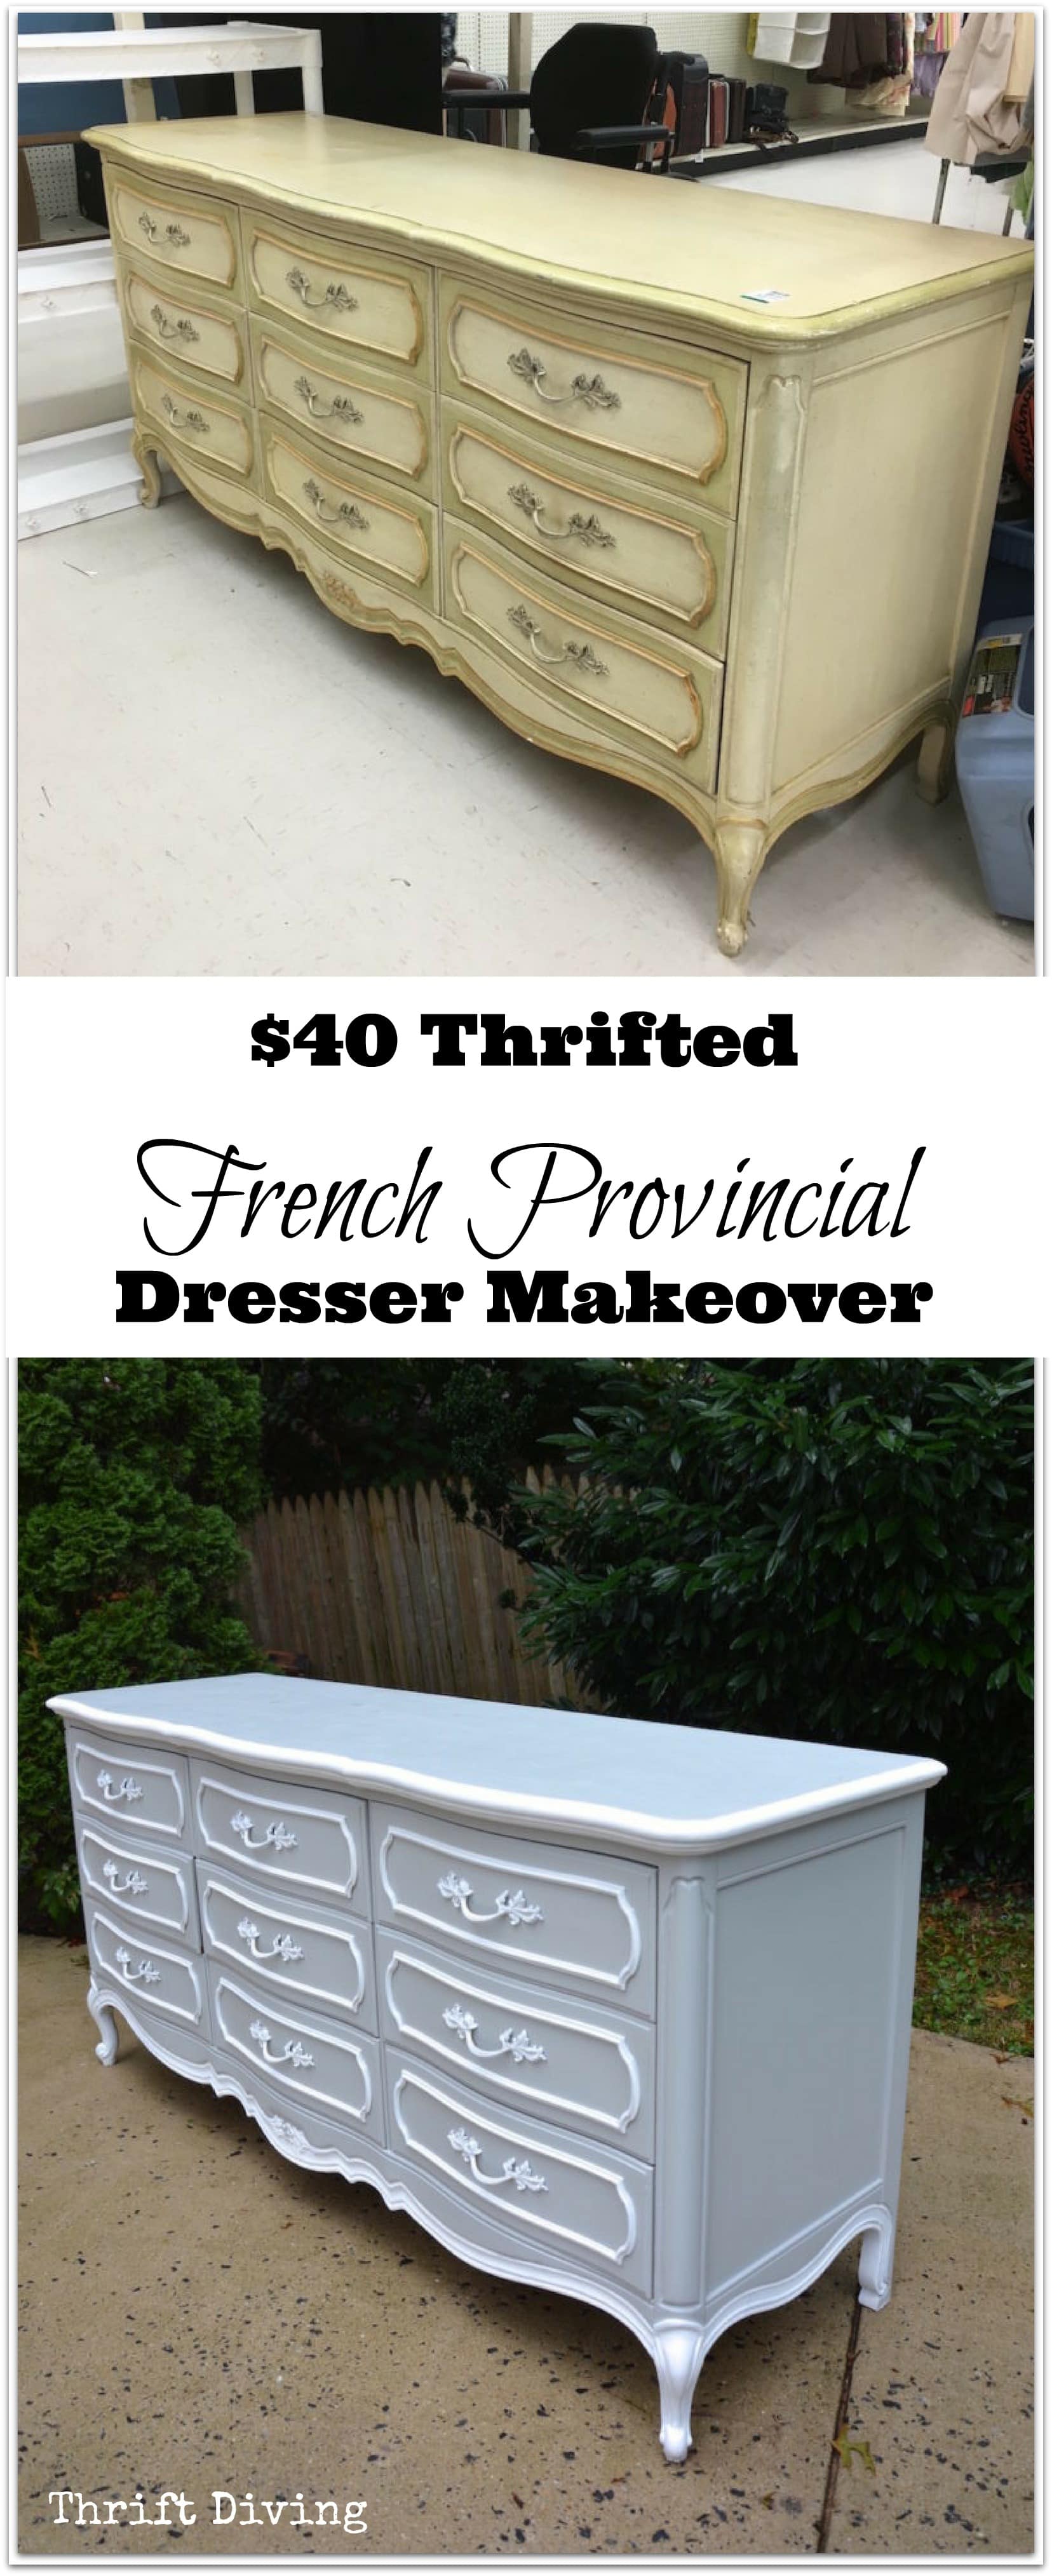 $40 Thrifted French Provincial Dresser Makeover